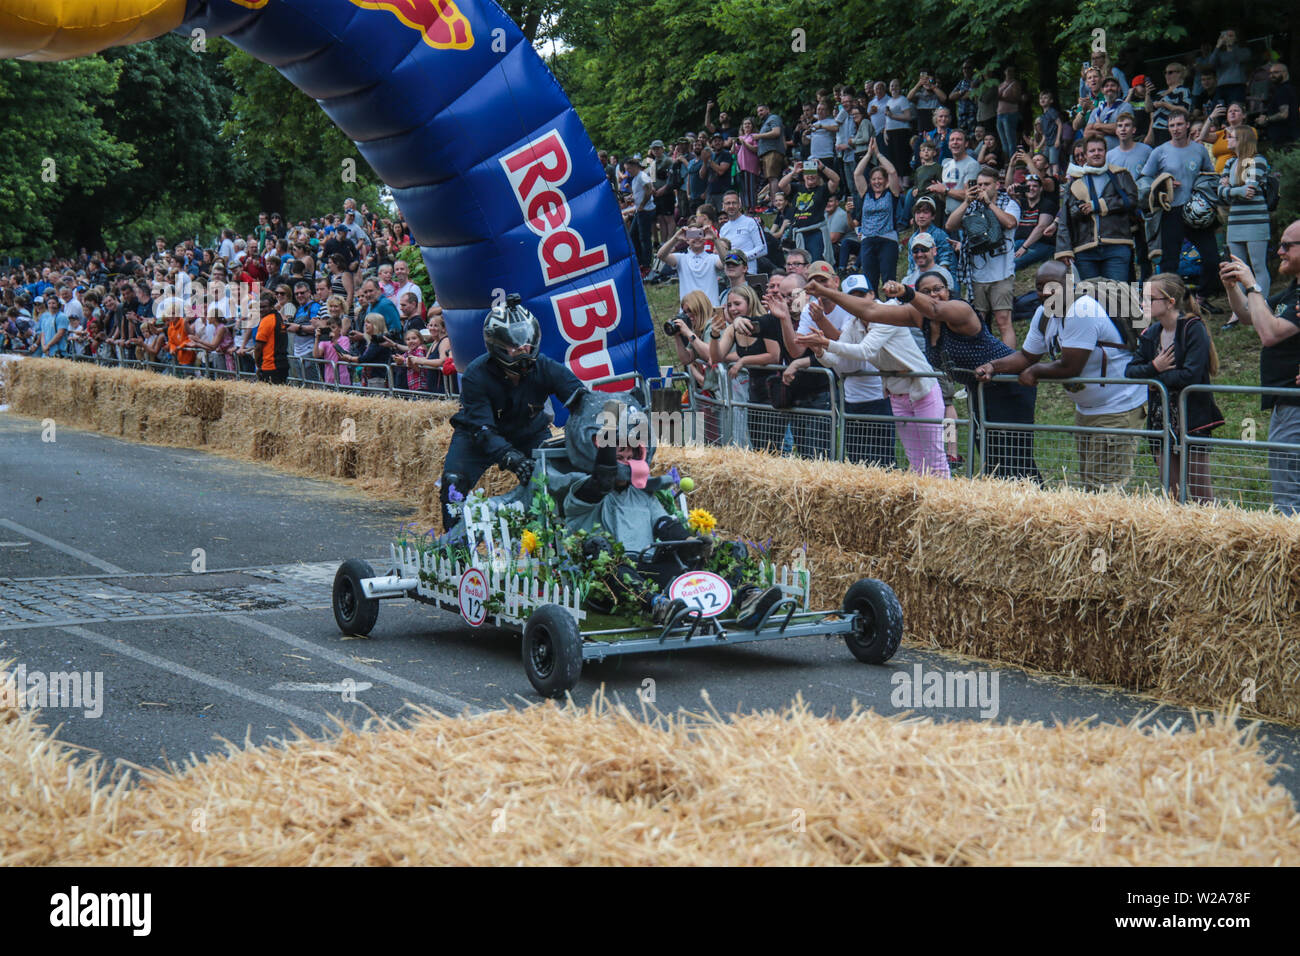 London, UK. 7 July 2019 Red Bull Soapbox Race the international event in which amateur drivers race home-made soapbox Each machine is fuelled by nothing but sheer courage, the force